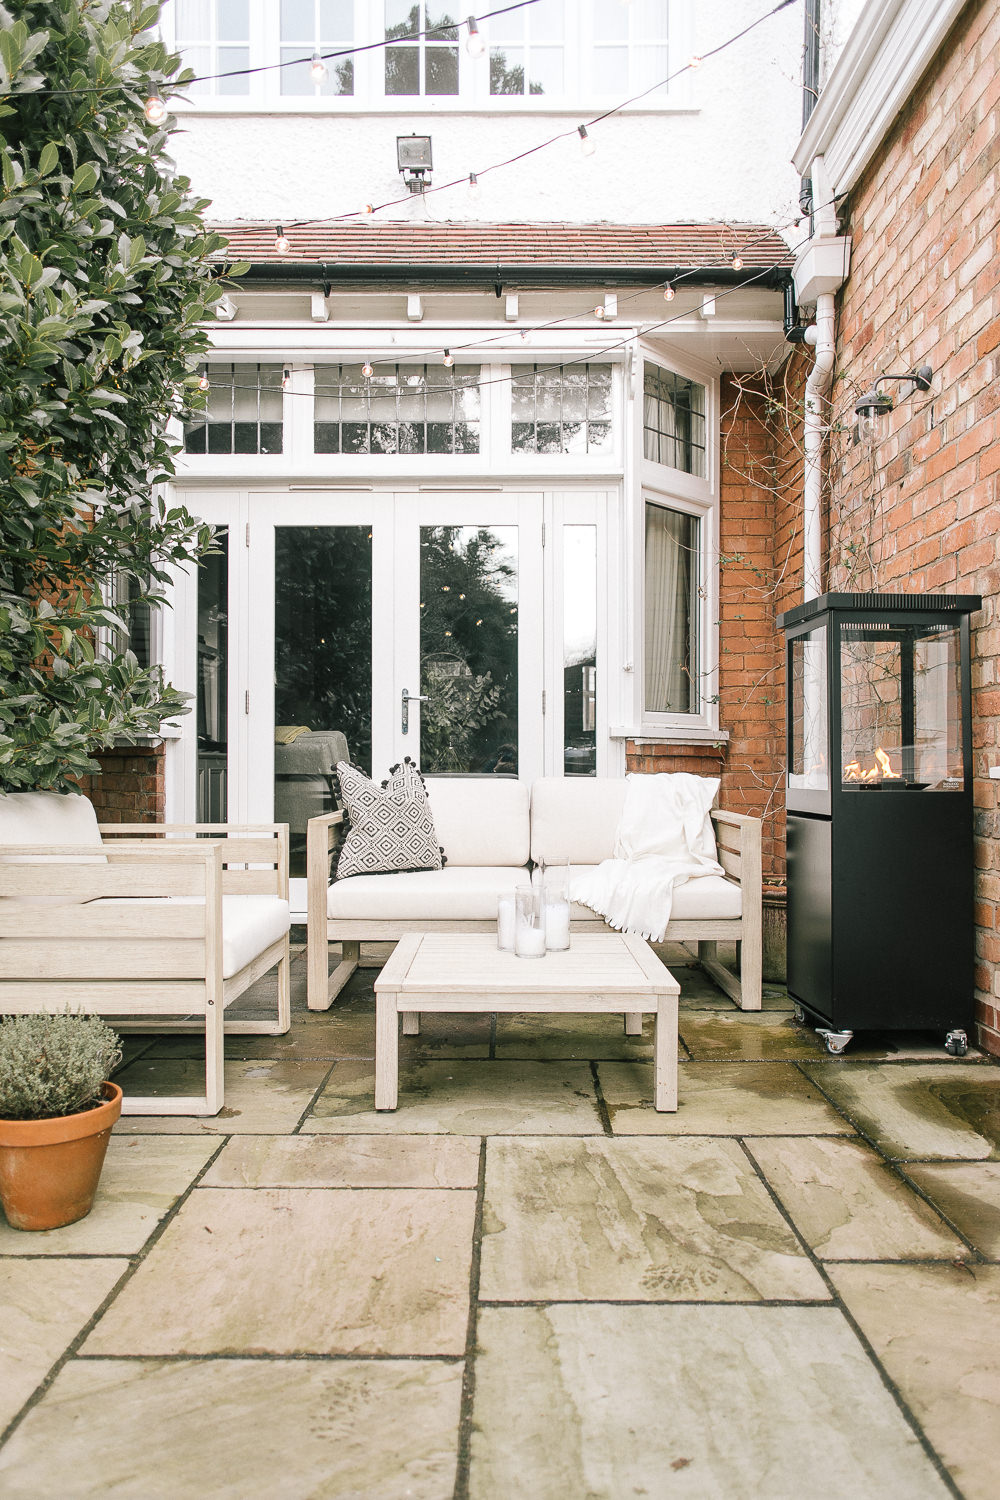 Garden of Claire's Characterful Edwardian Semi | Patio Seating with Festoon Lights and John Lewis St Ives Furniture